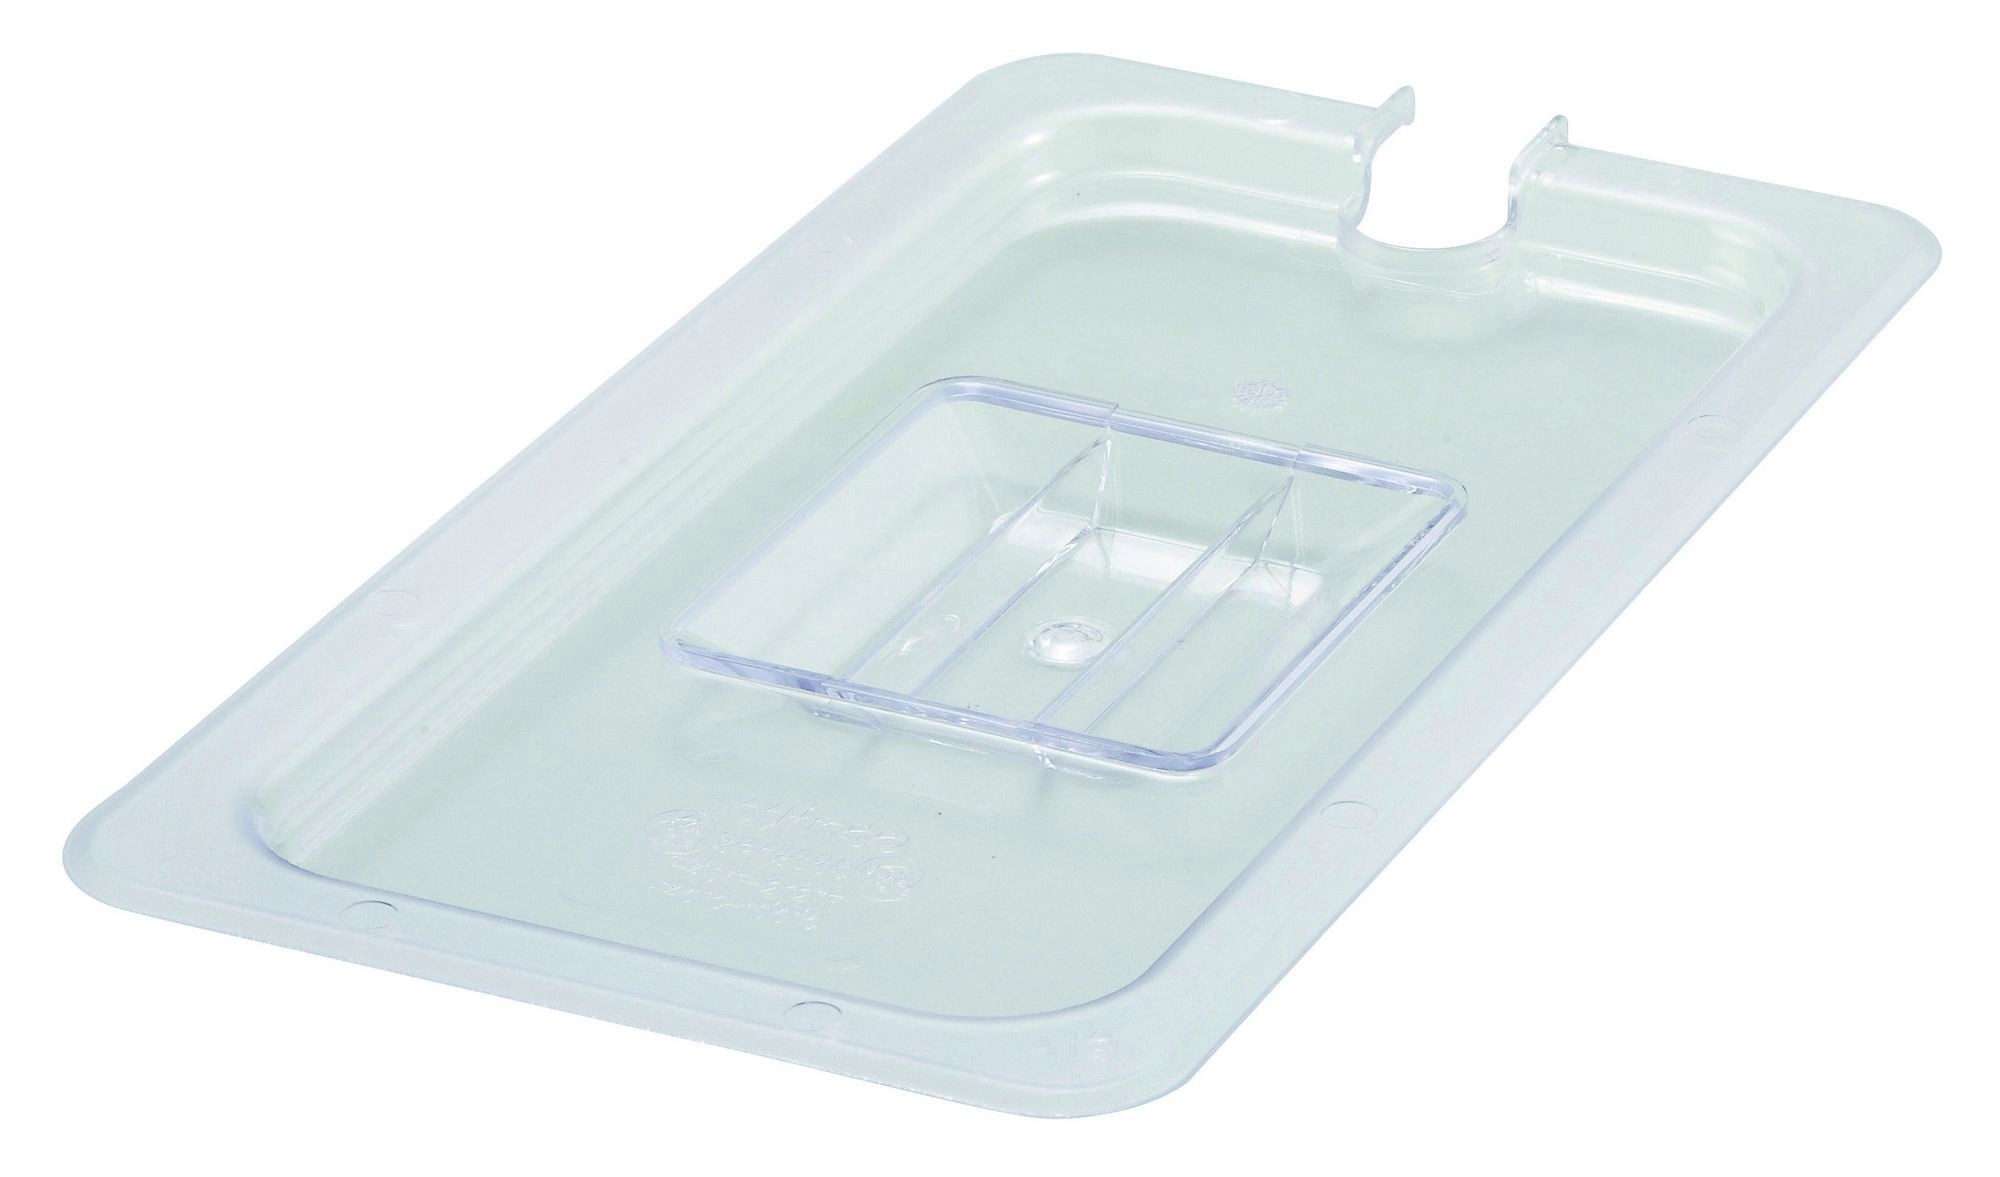 Winco SP7300C Poly-Ware Slotted 1/3 Size Food Pan Cover